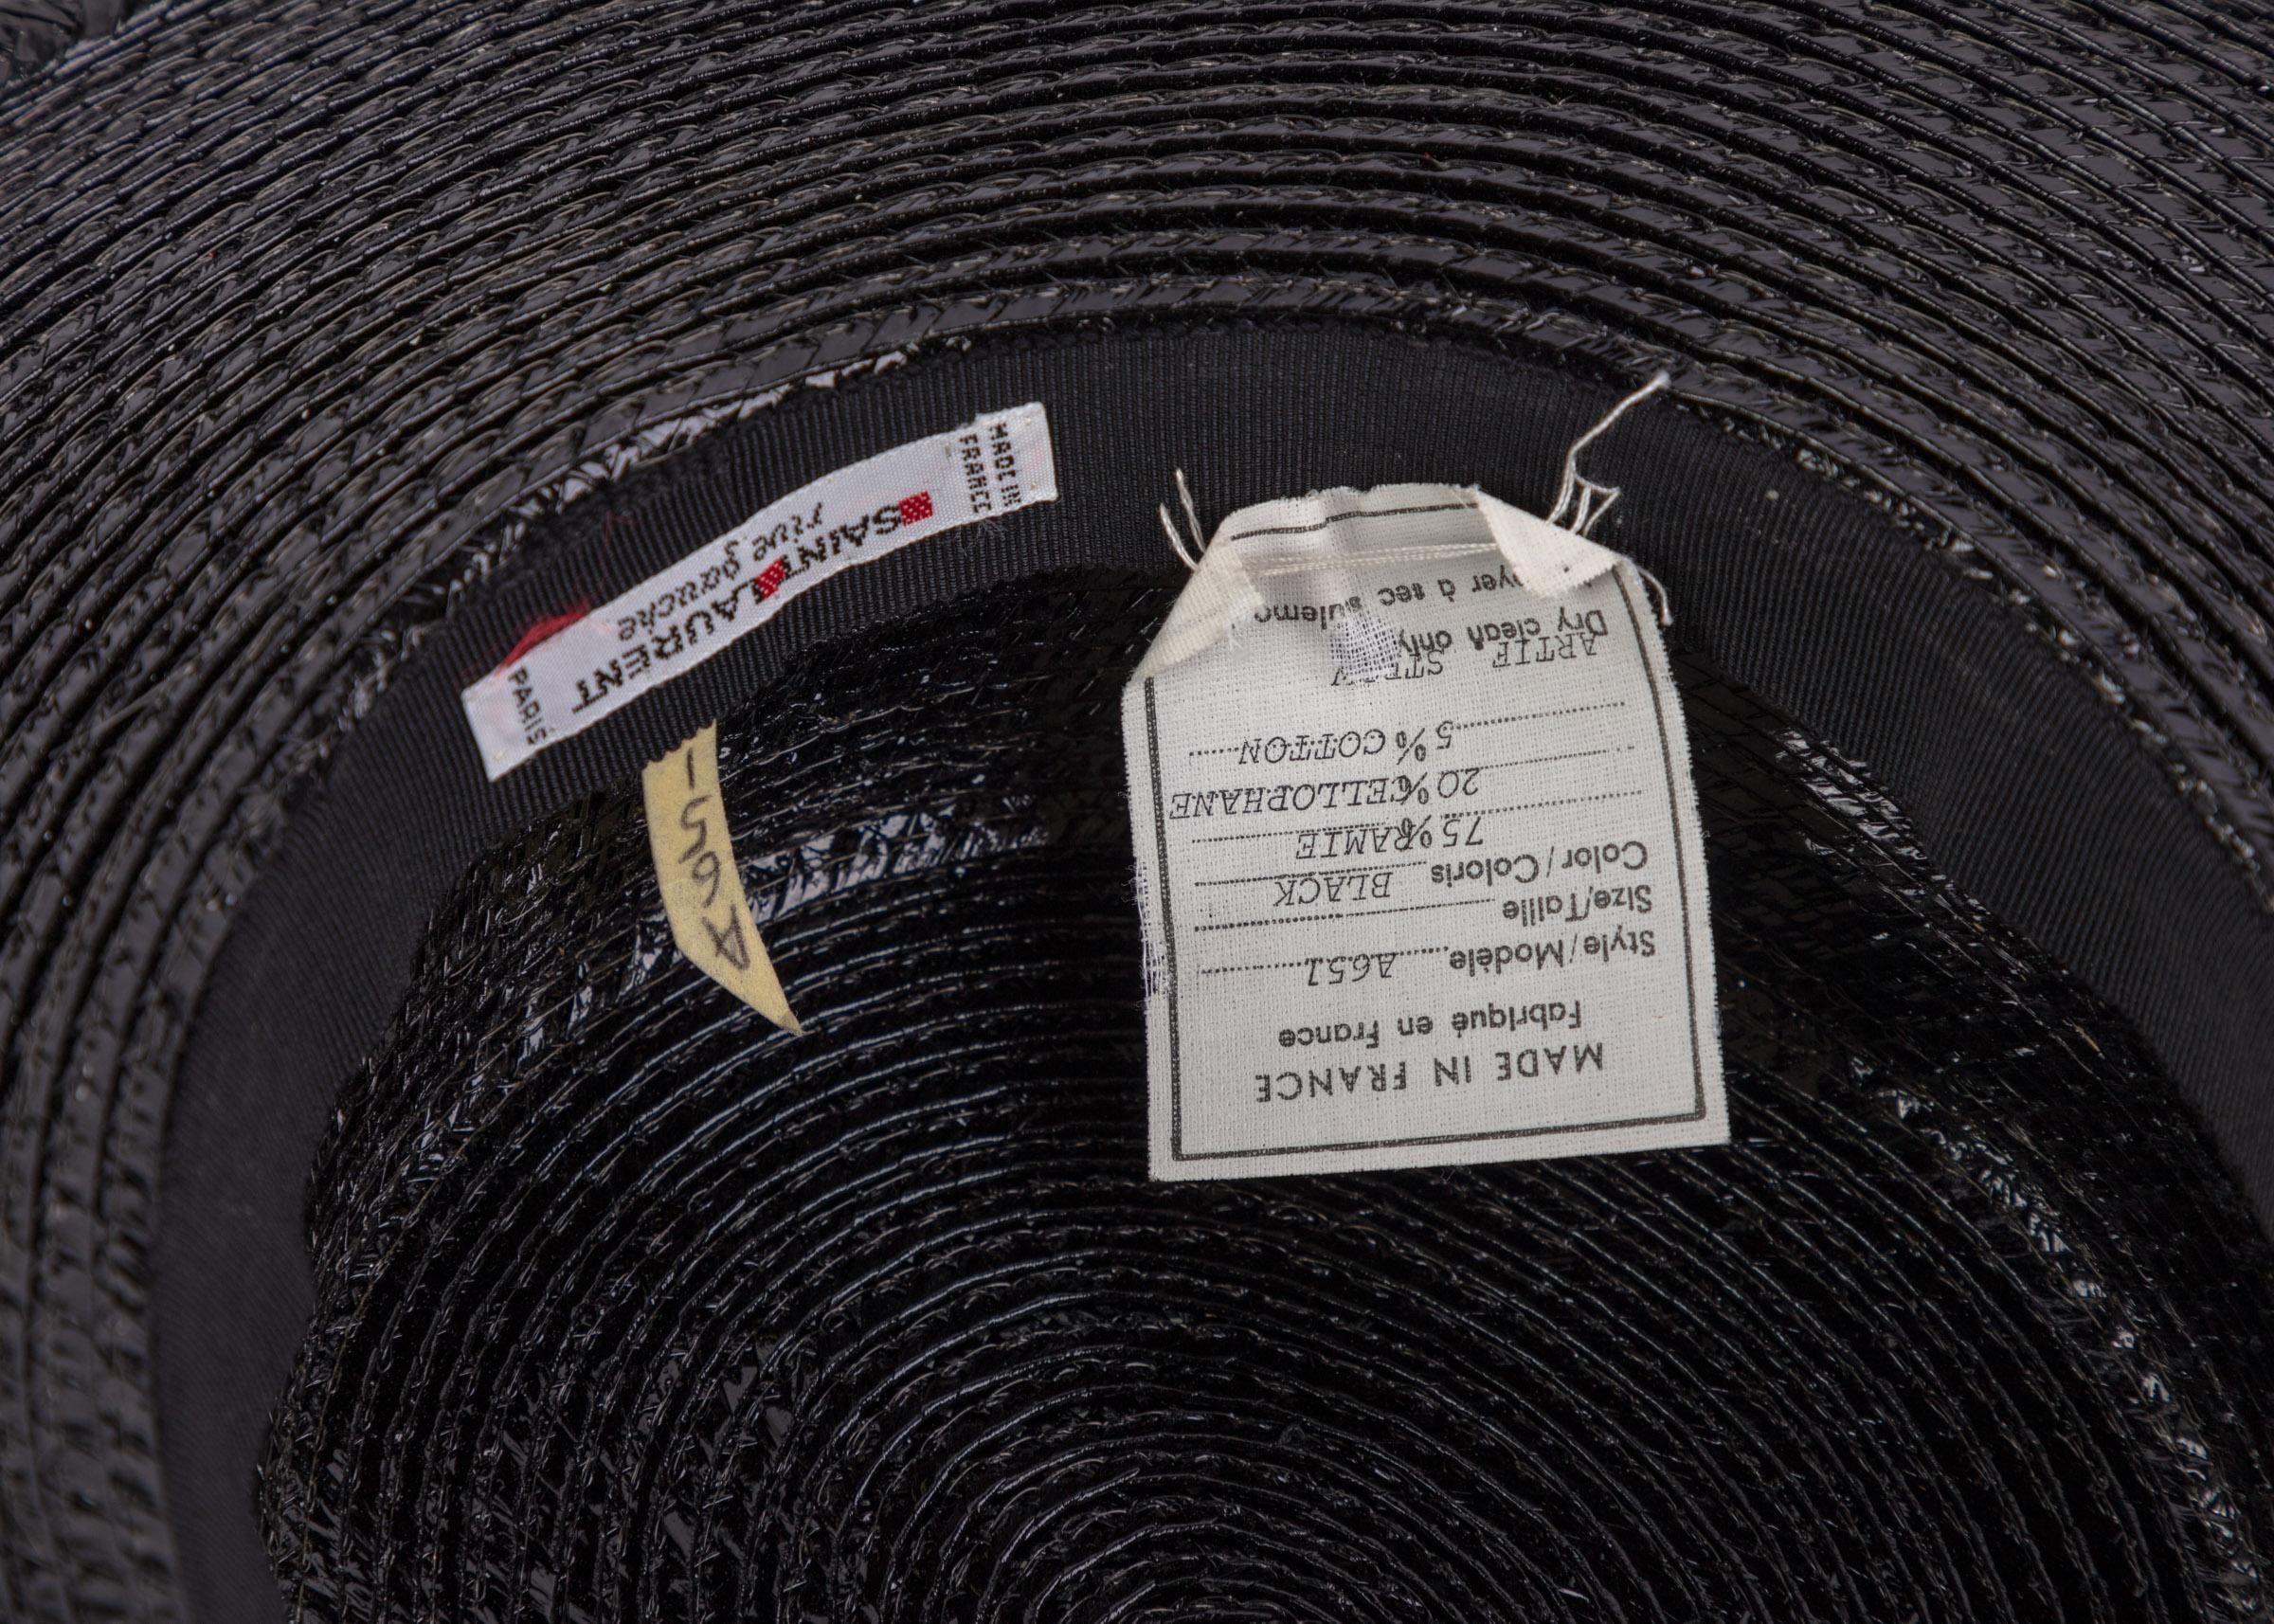 Yves Saint Laurent YSL Vintage Glossy Black Straw Hat, 1980s In Excellent Condition For Sale In Boca Raton, FL